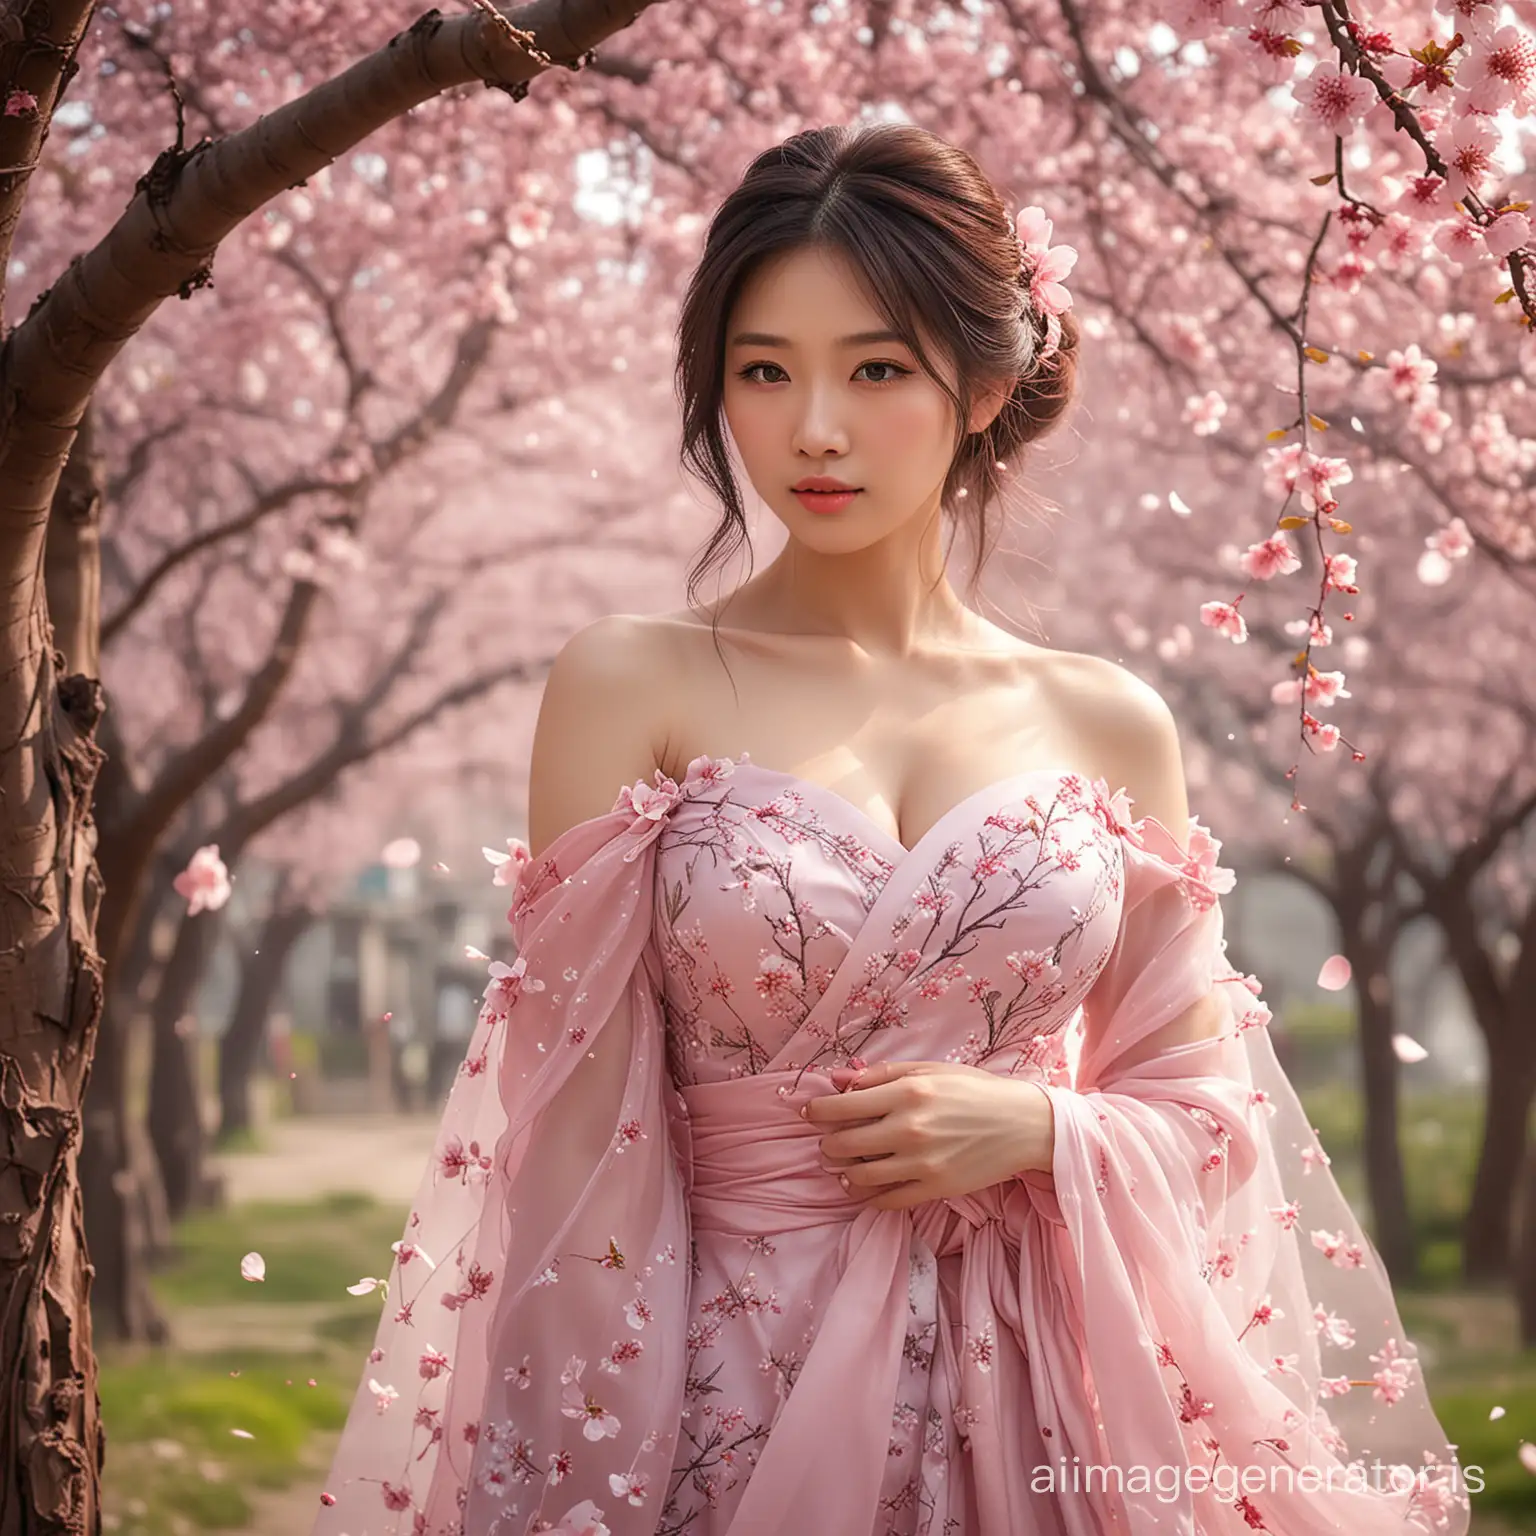 a Korean woman, bitten lips, very big breasts, firm breasts, standing under a tree with pink flowers, cherry blossom background, realistic fantasy photography, cherry blossom petals, beautiful Aerith Gainsborough, cherry blossoms blowing in the wind, girl beautiful fantasy, cherry blossoms, cherry blossoms, cherry blossoms in the background, cherry blossoms, lost in a beautiful fairy landscape," beautiful anime woman, ethereal fairy tale, by Anna Katharina Block